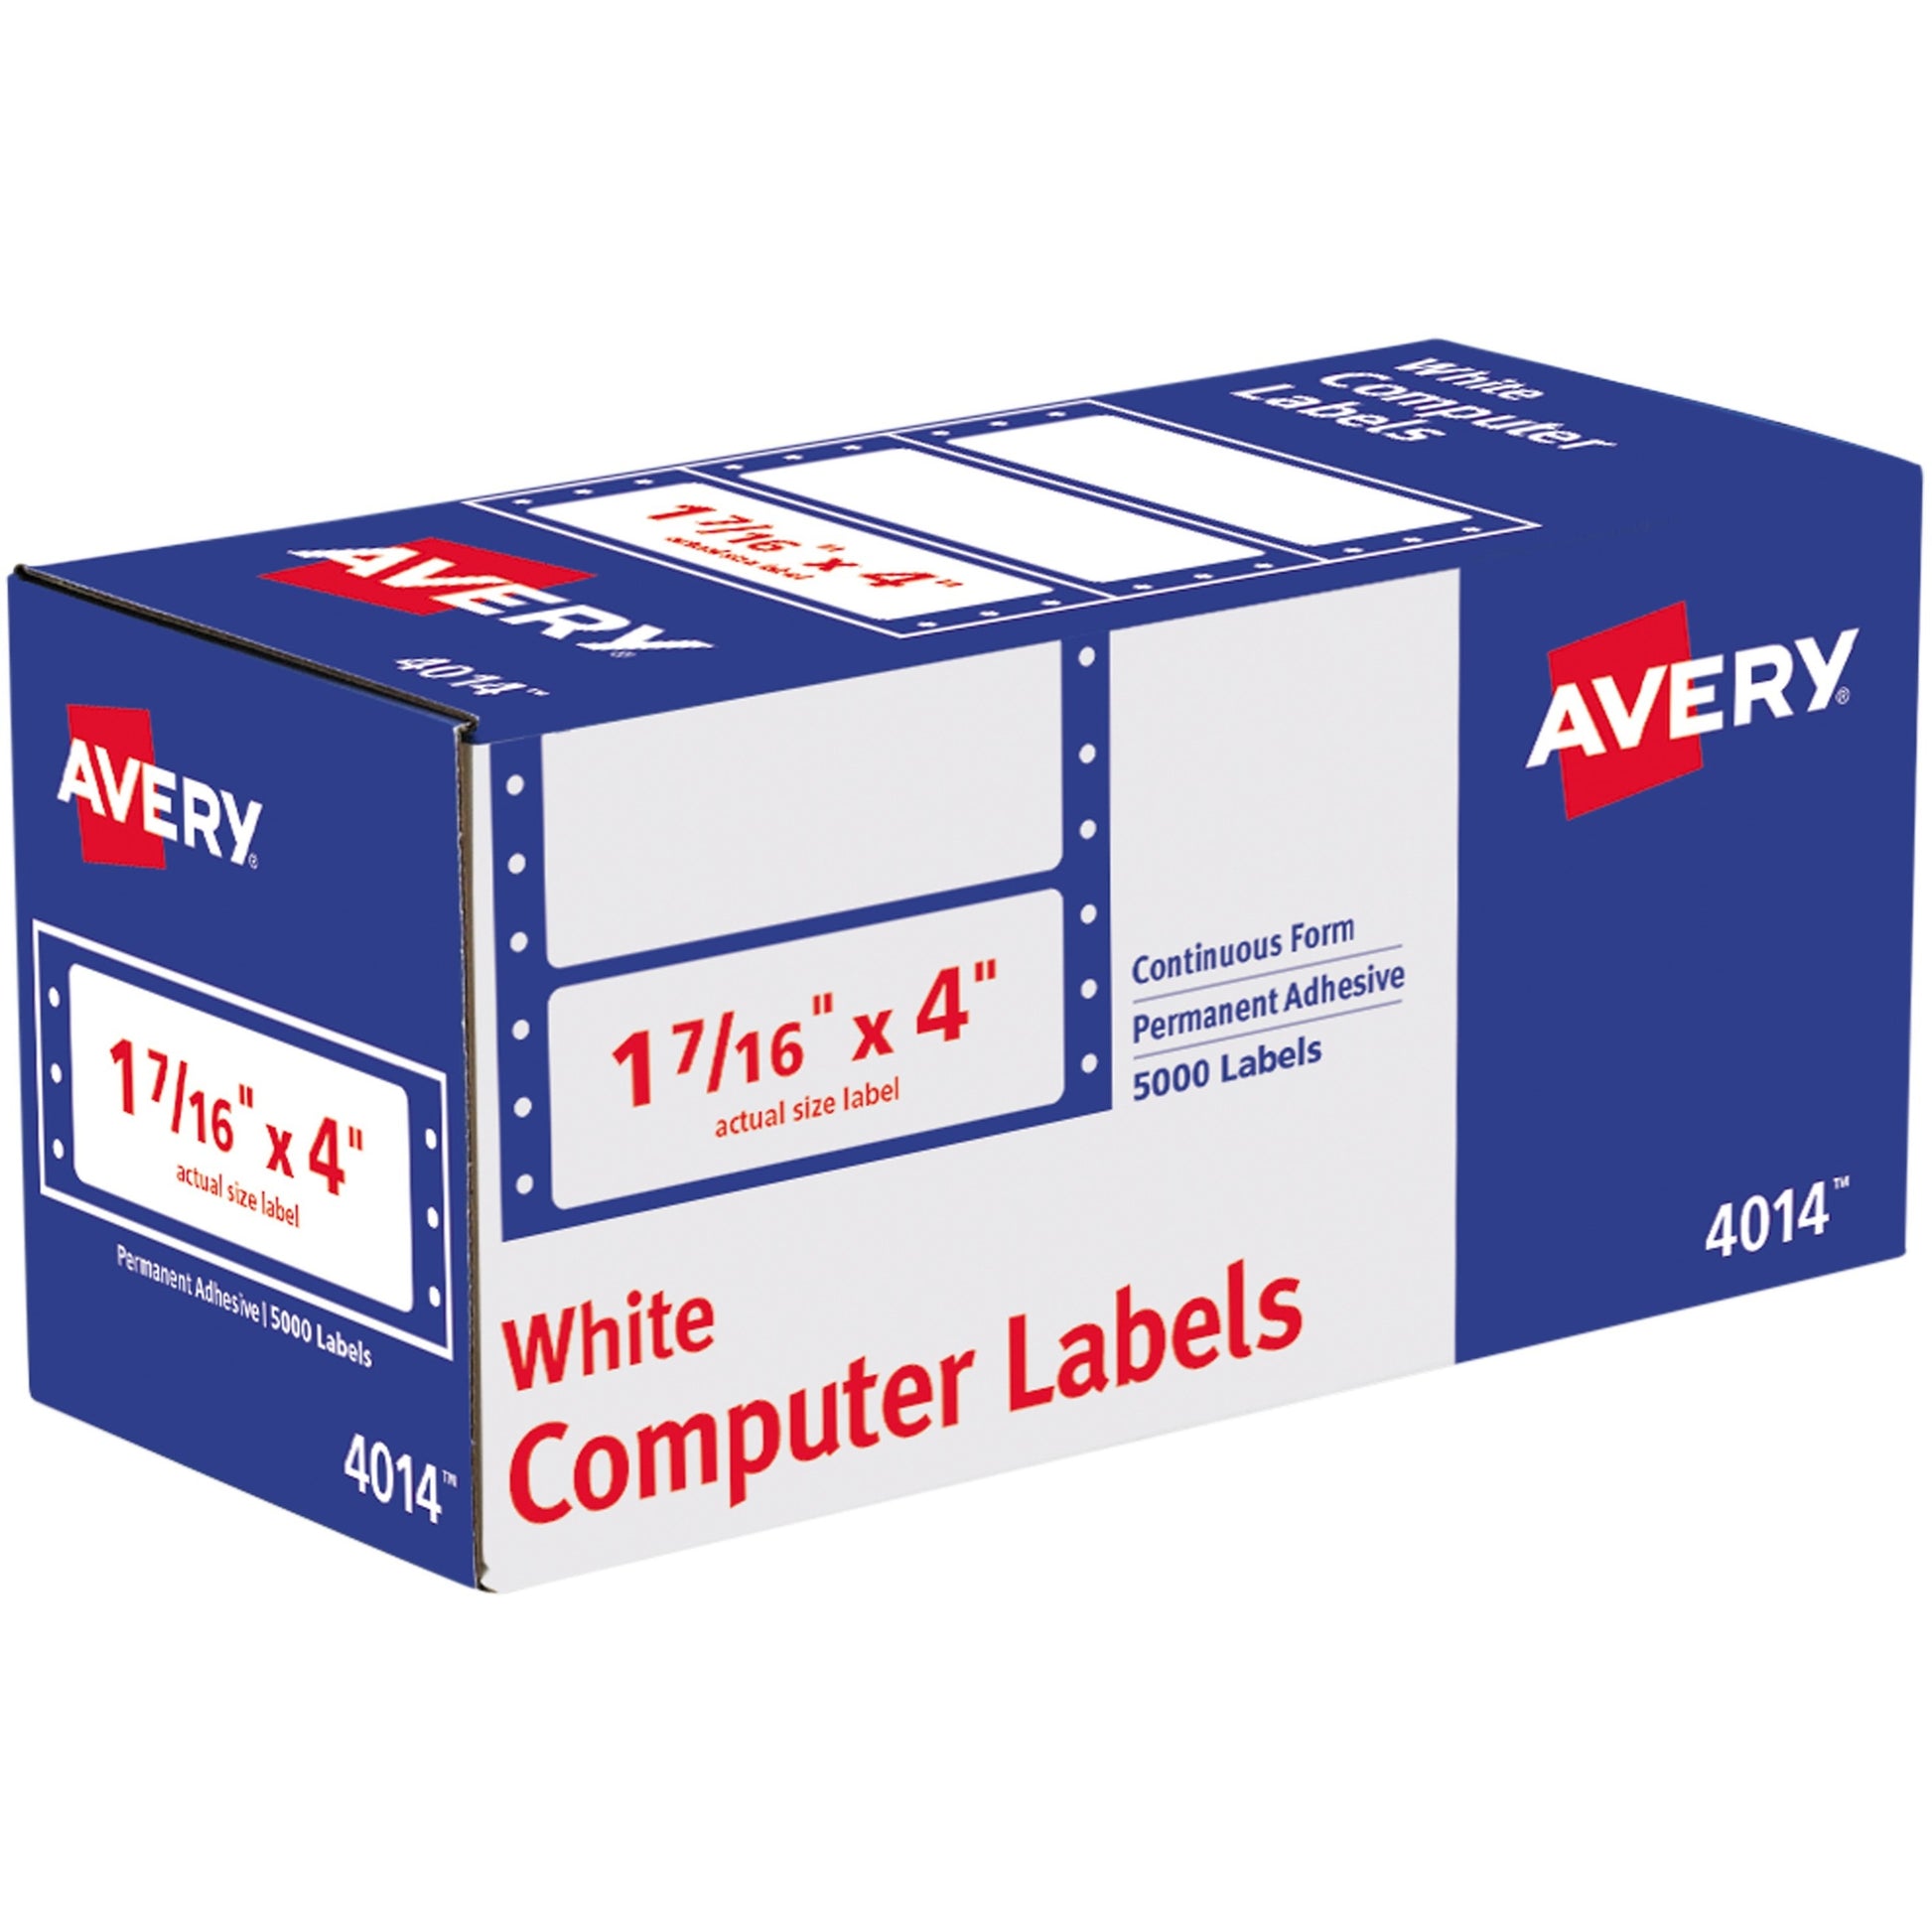 Avery&reg; Continuous Form Computer Labels, Permanent Adhesive, 4" x 1-7/16" , 5,000 Labels (4014)